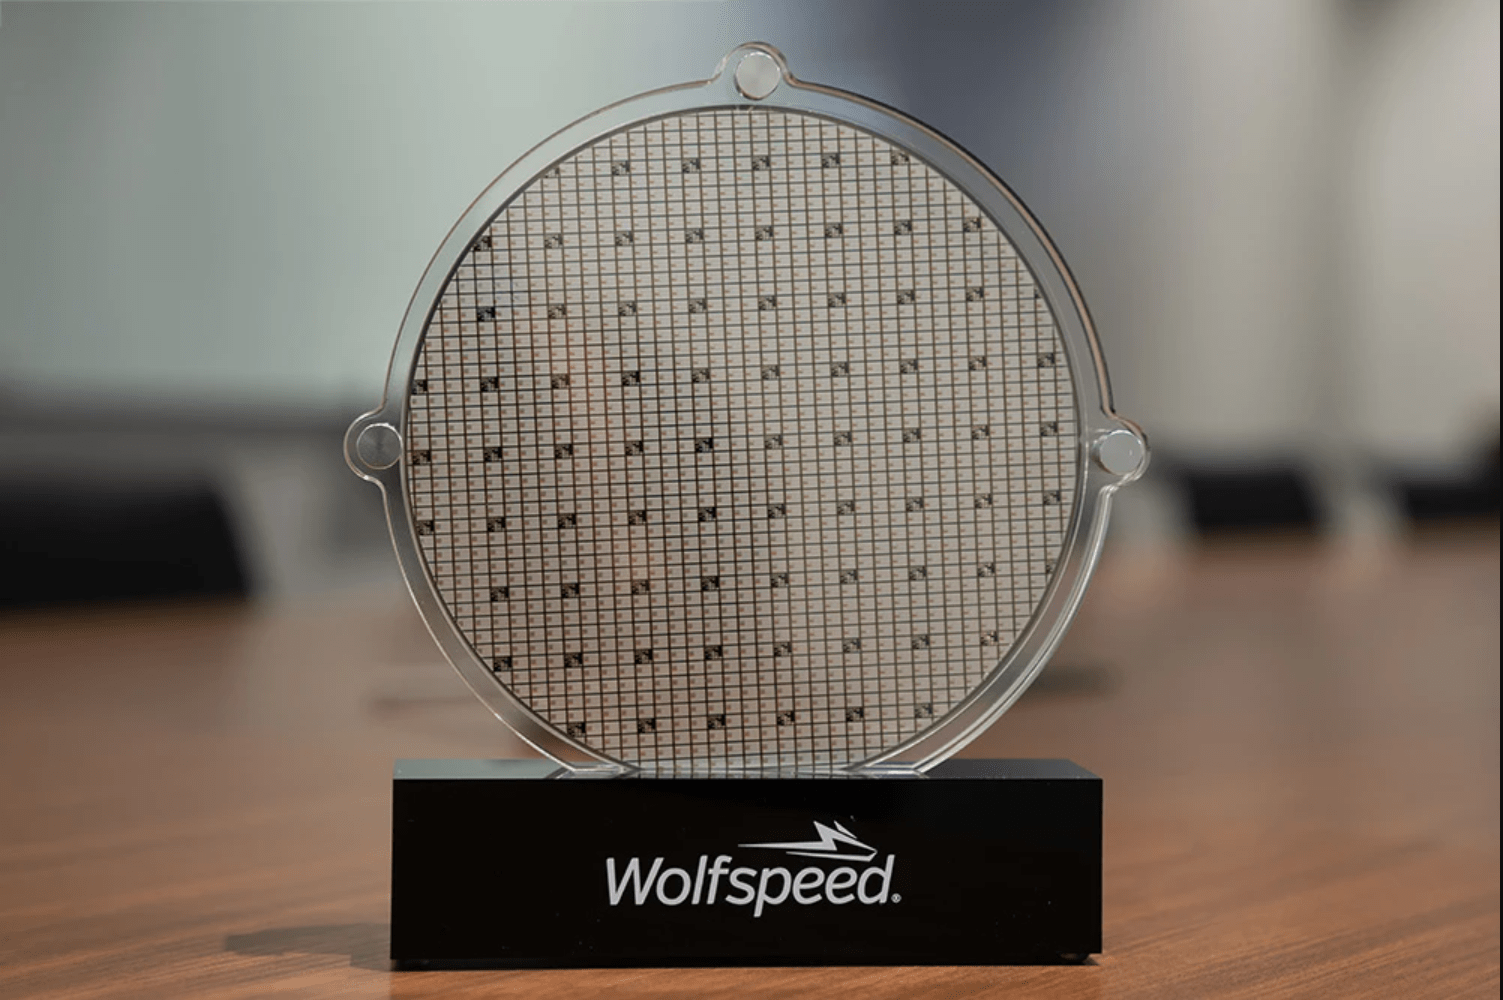 Infineon And Wolfspeed Expand Silicon Carbide Wafer Supply Agreement